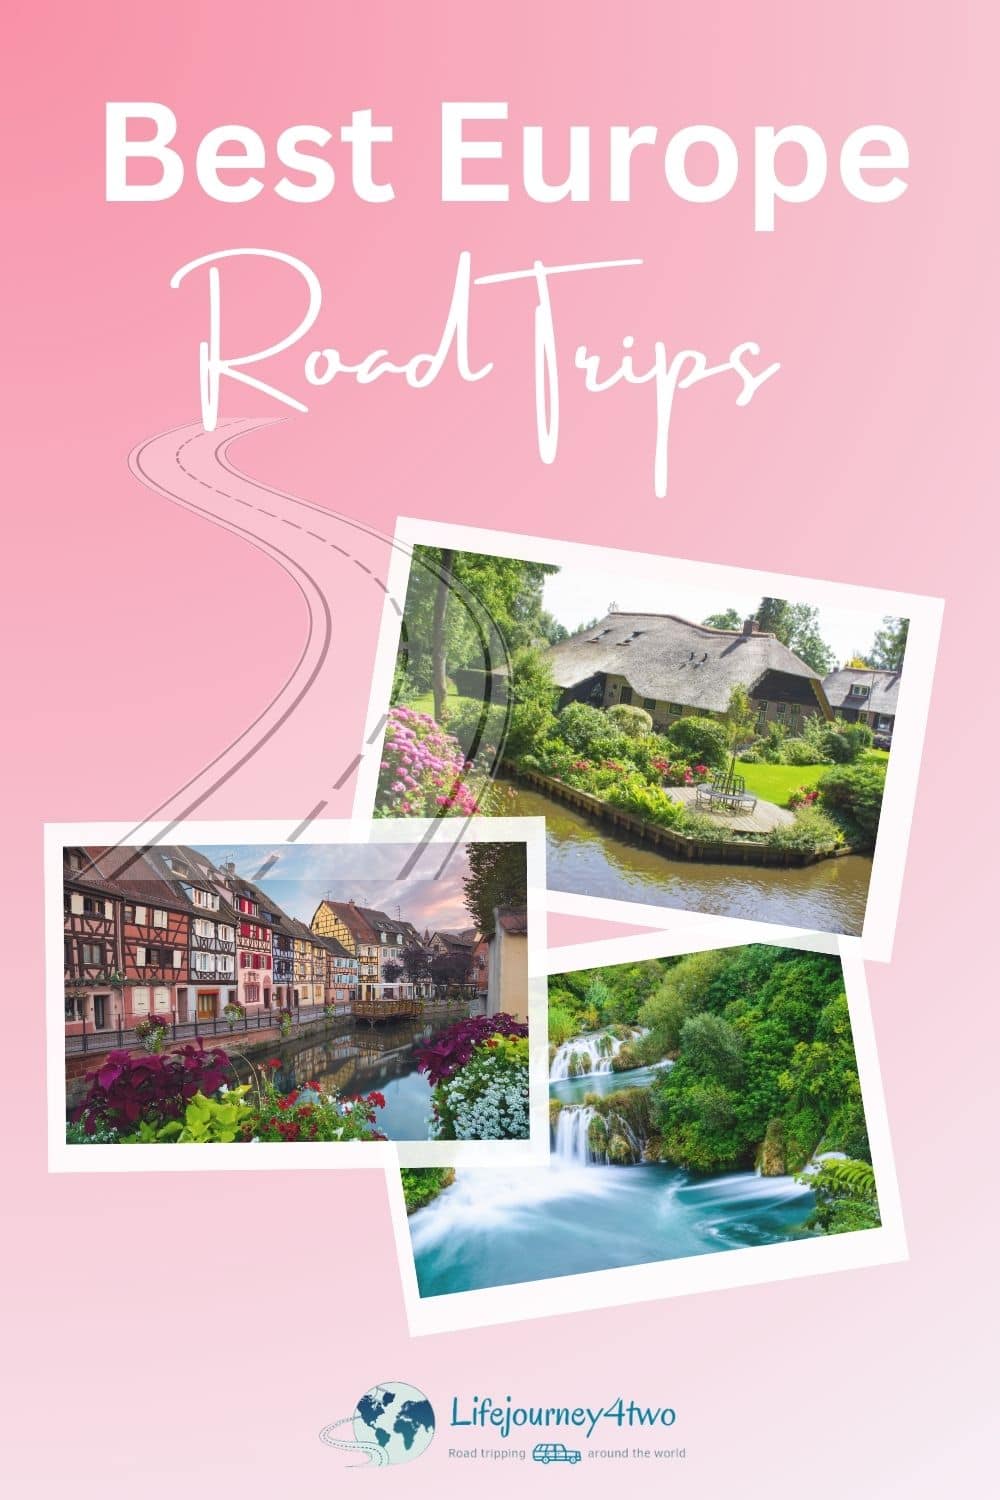 Best Europe Road trip Routes Pinterest pin